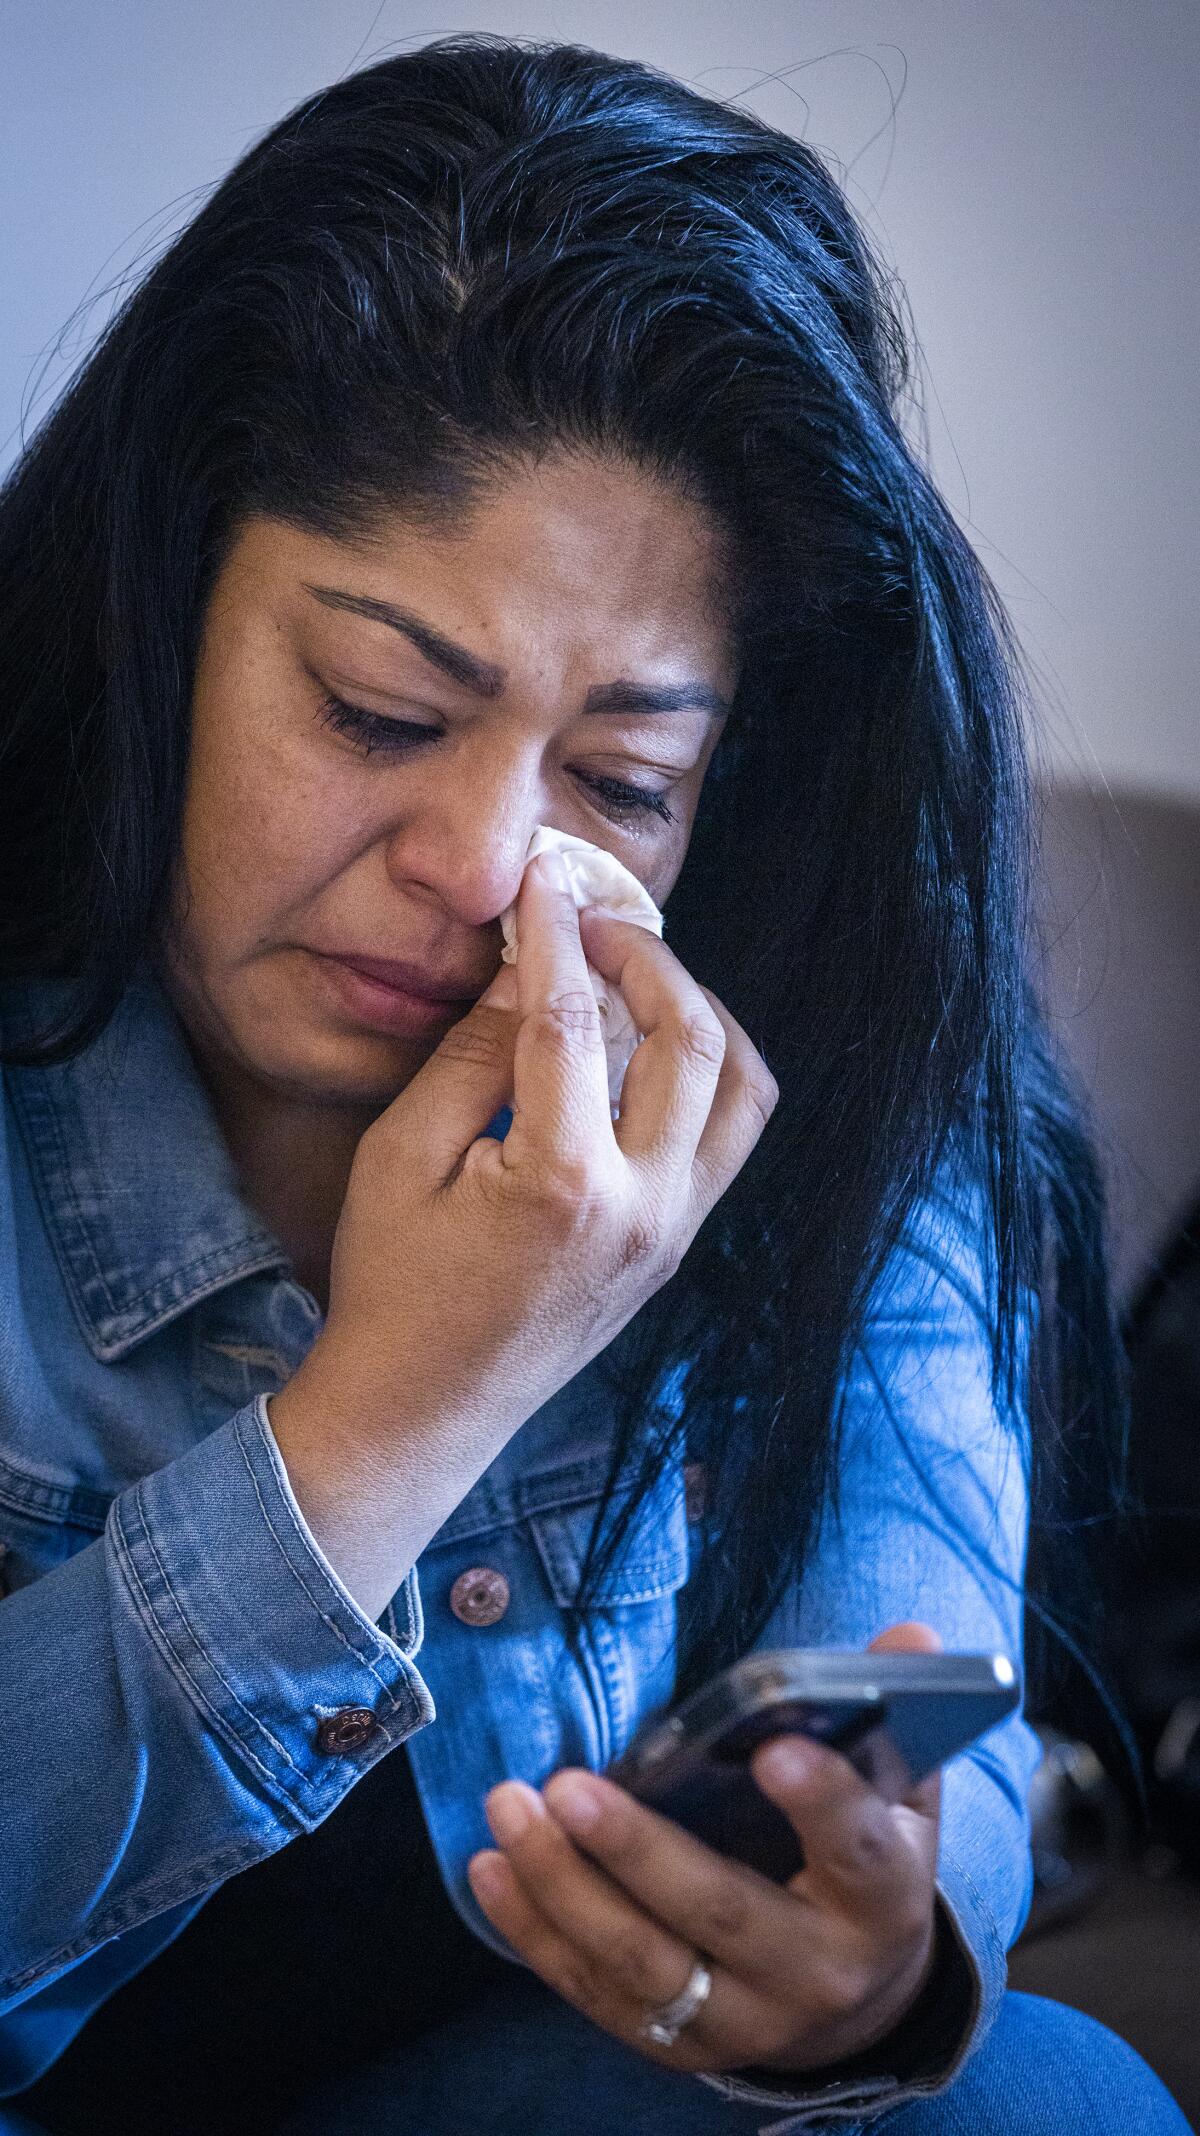 Cristian Mendoza weeps while talking about the life of her brother, Alan Castellanos, who was fatally shot by the LAPD